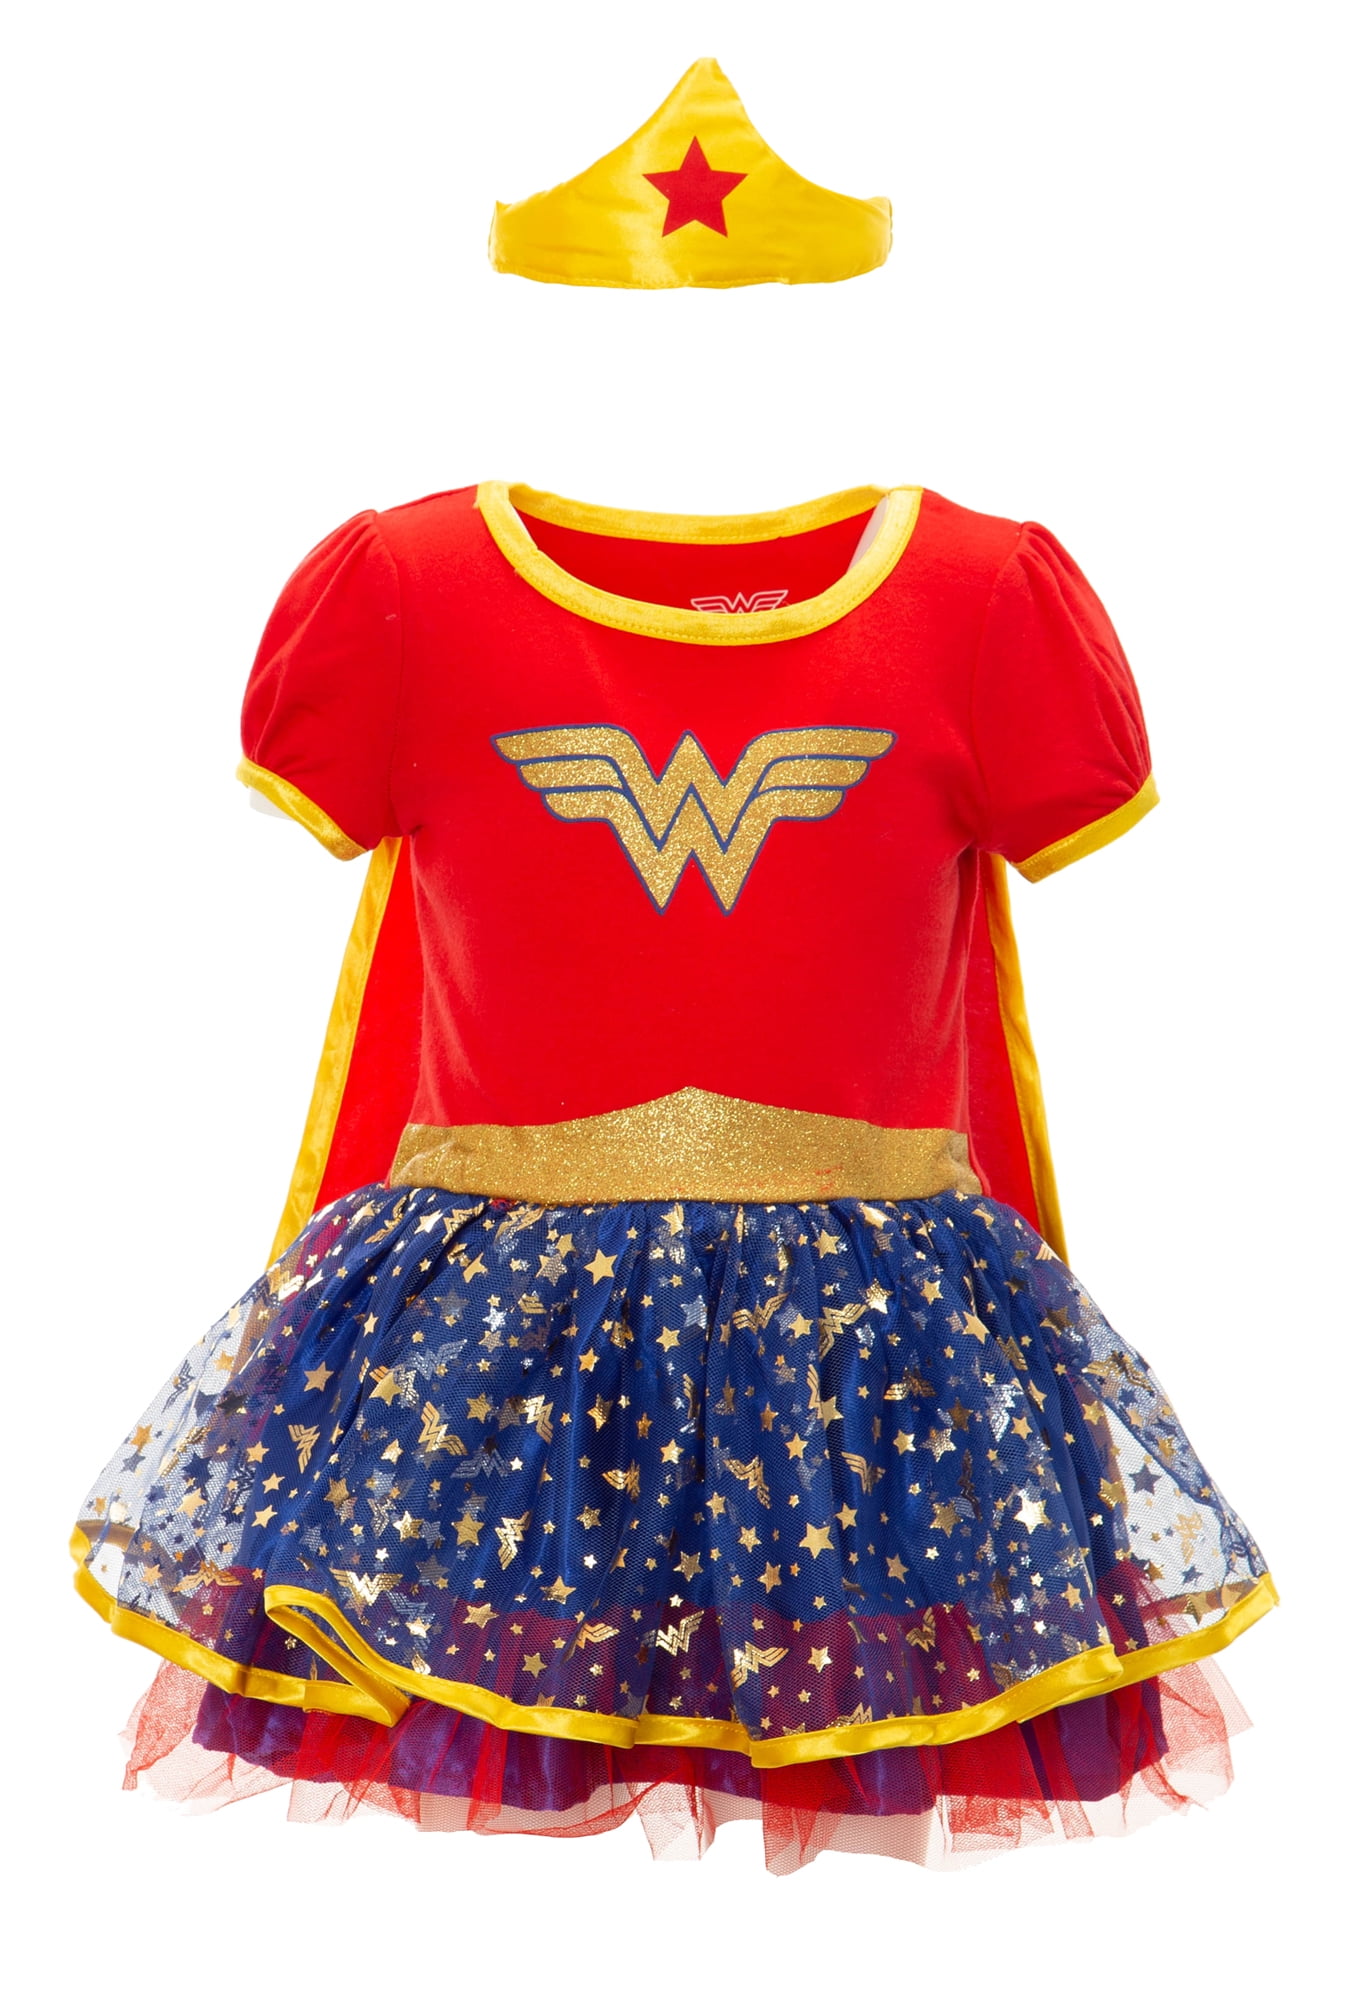 DC Comics Wonder Woman Girl's Halloween Fancy-Dress Costume for Toddler,  with Gold Tiara Cape 3T 